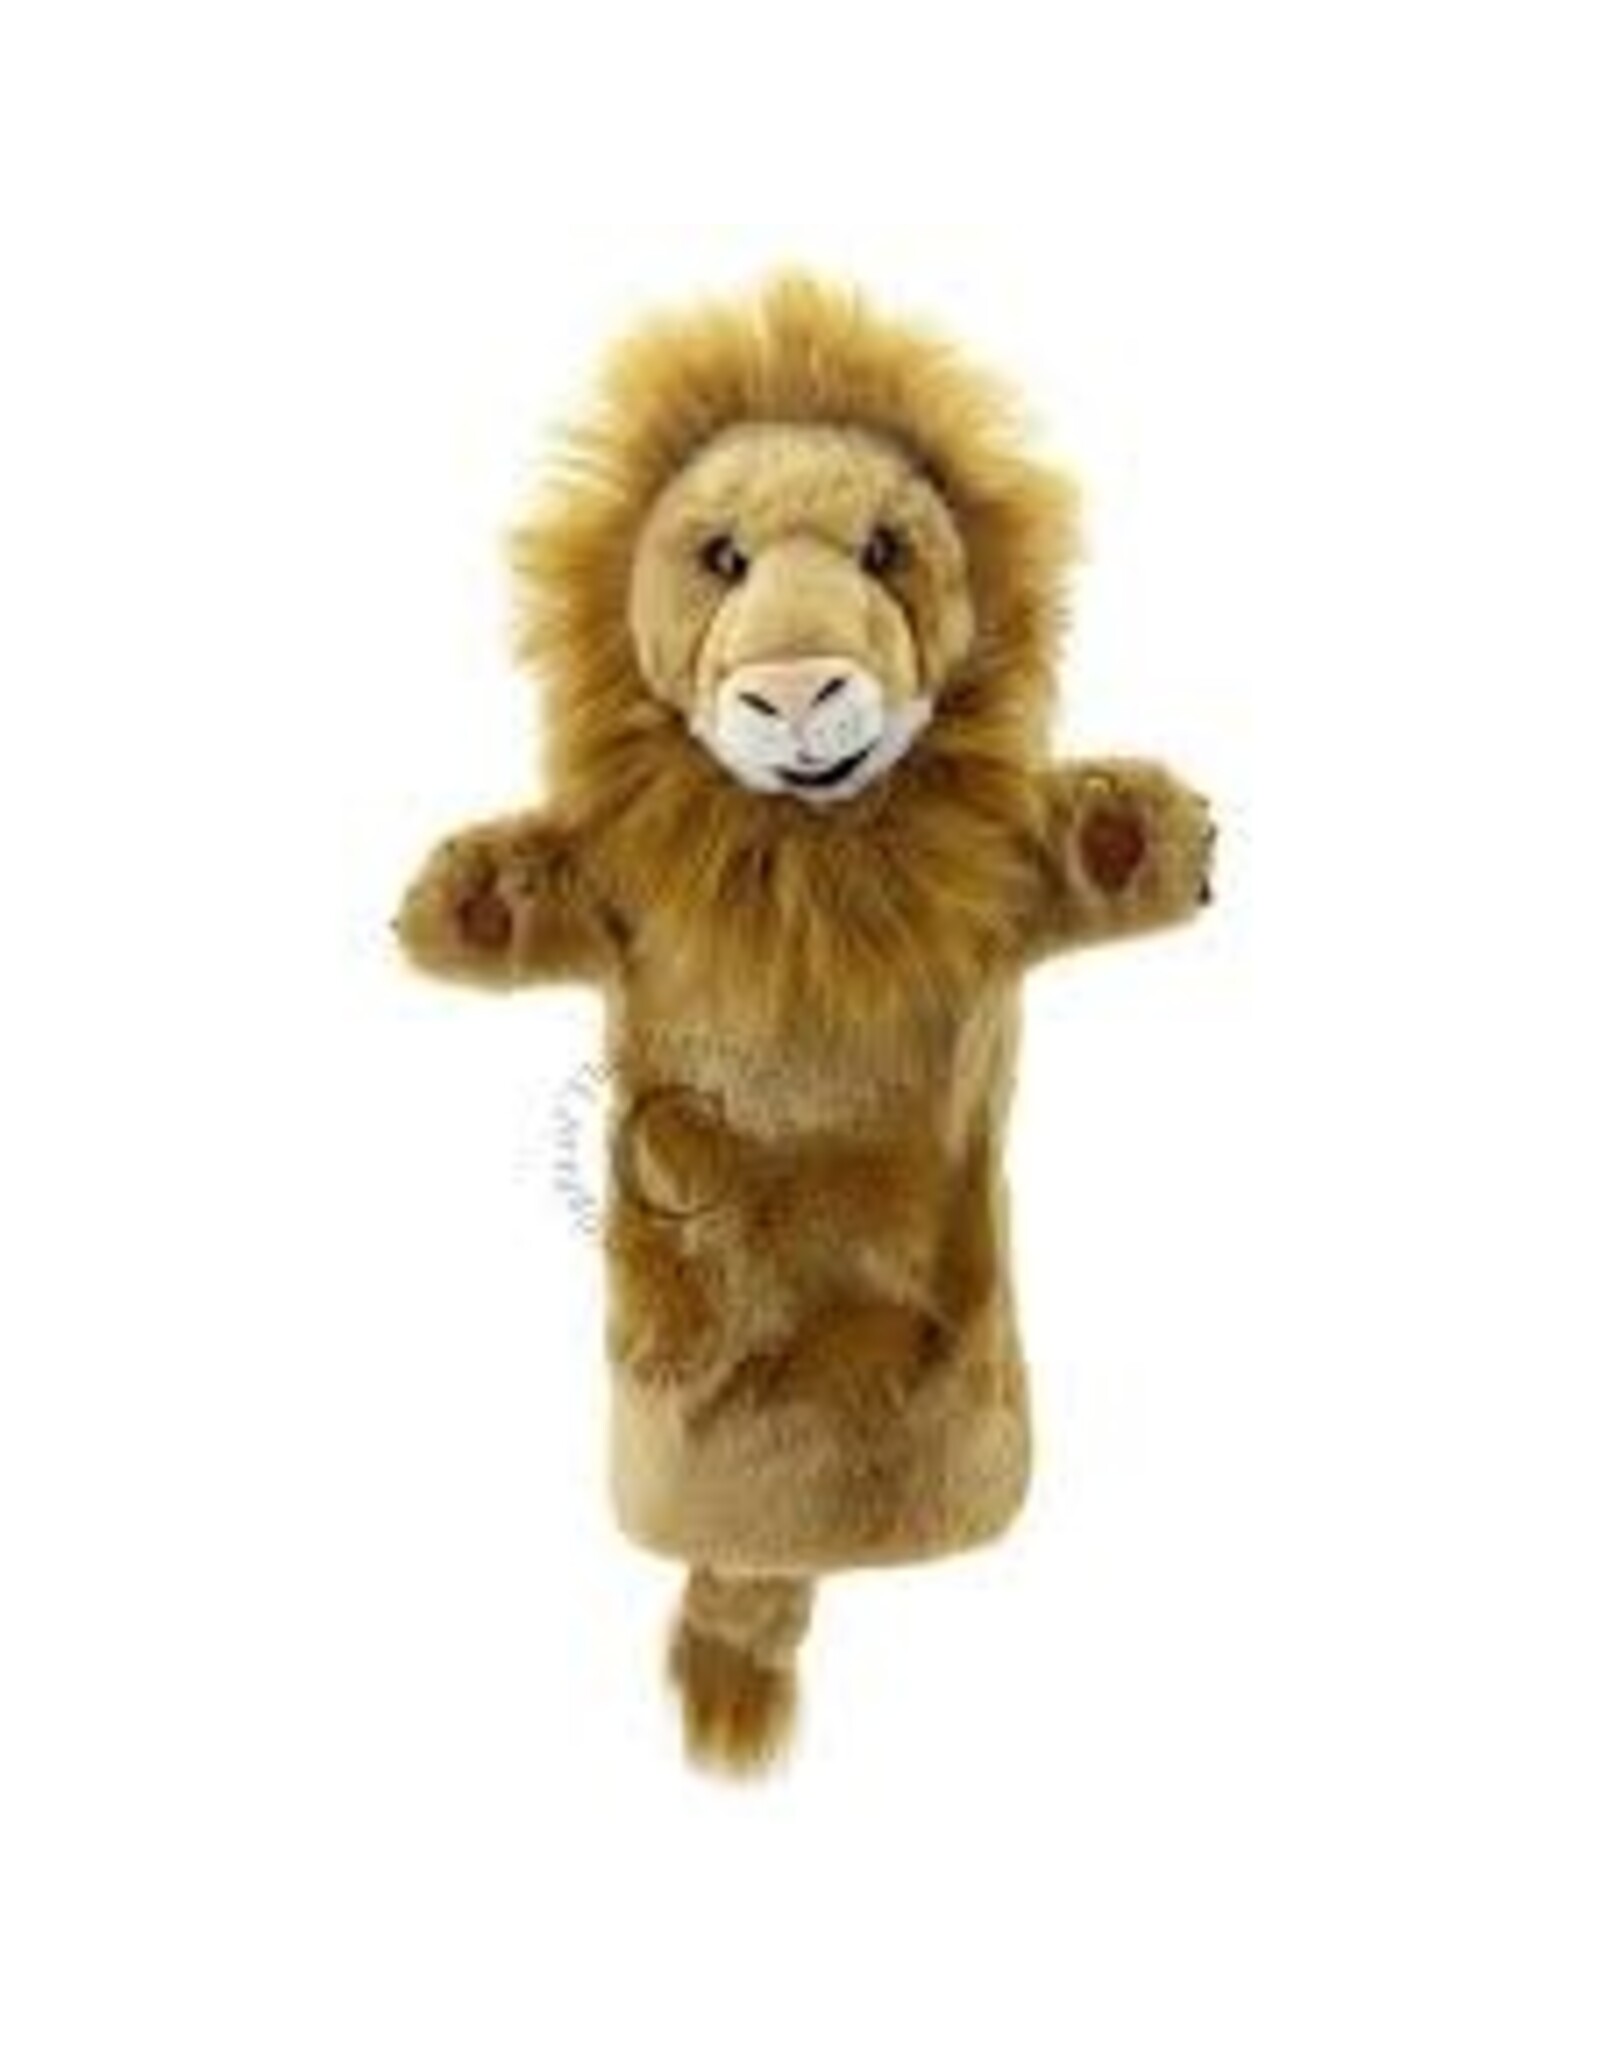 Long-Sleeved Glove Puppets: Lion